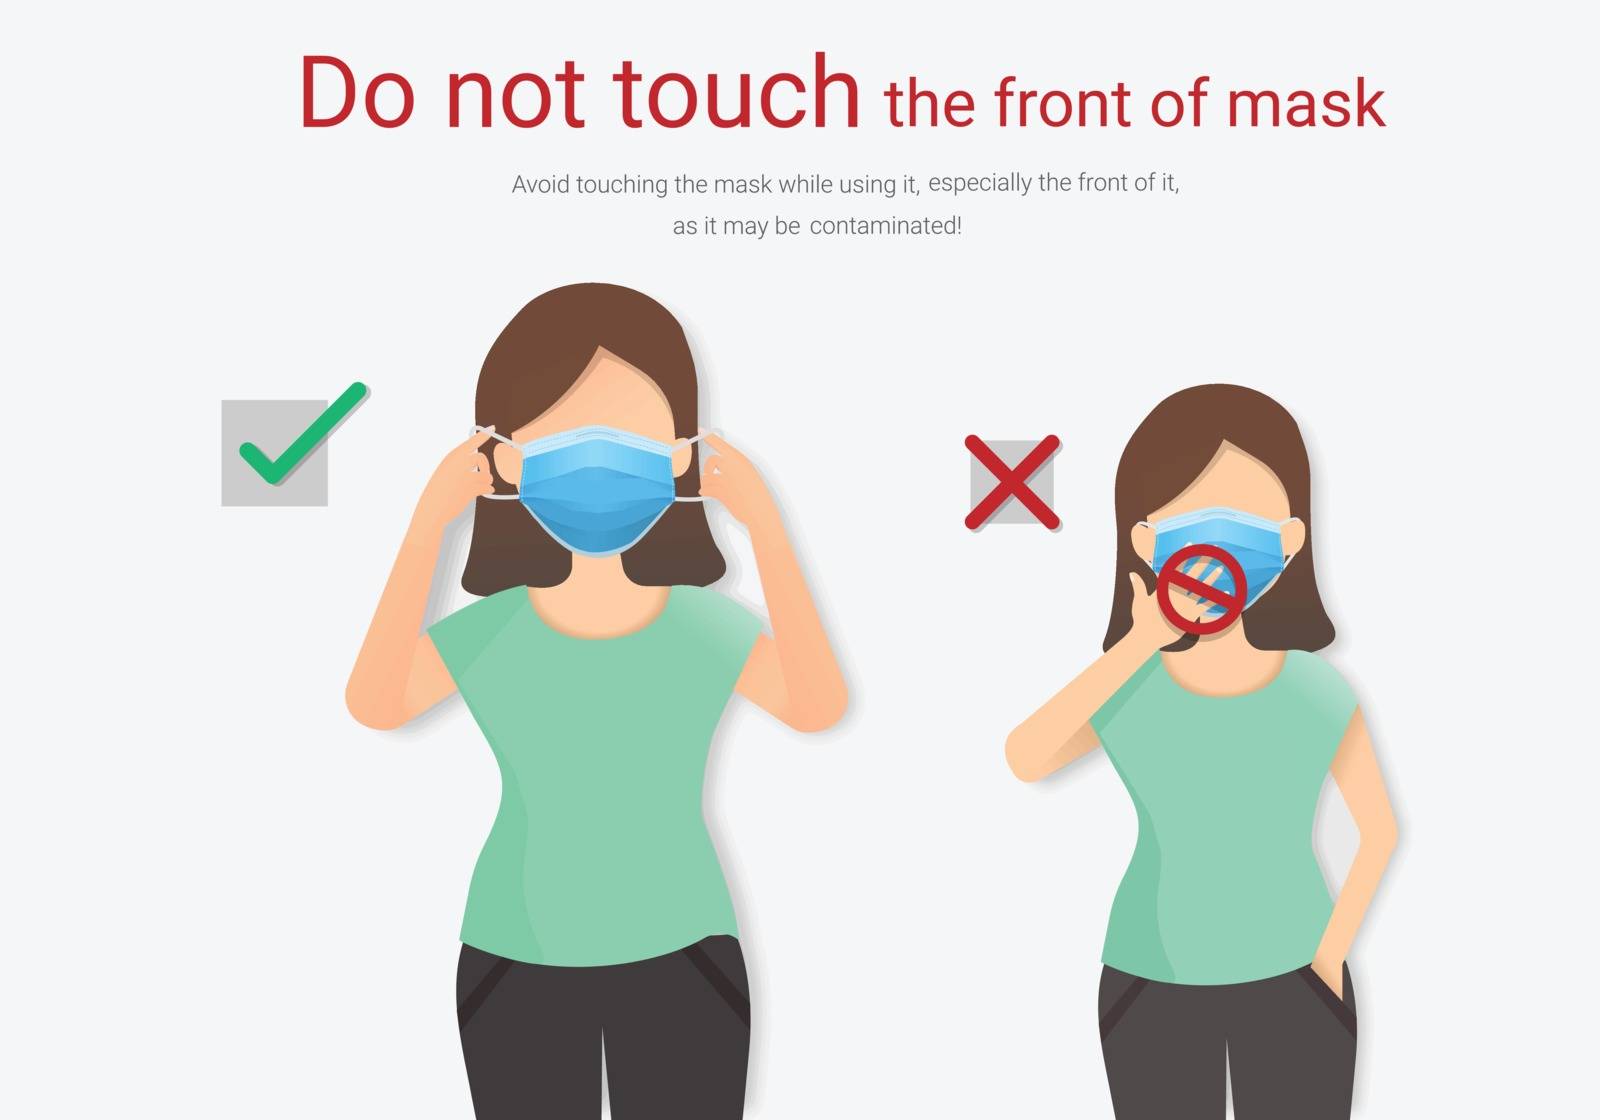 Do not touch the front of mask, Mask Virus outbreak prevention, Objects and medical supply waste management Coronavirus Covid 19, vector illustration.